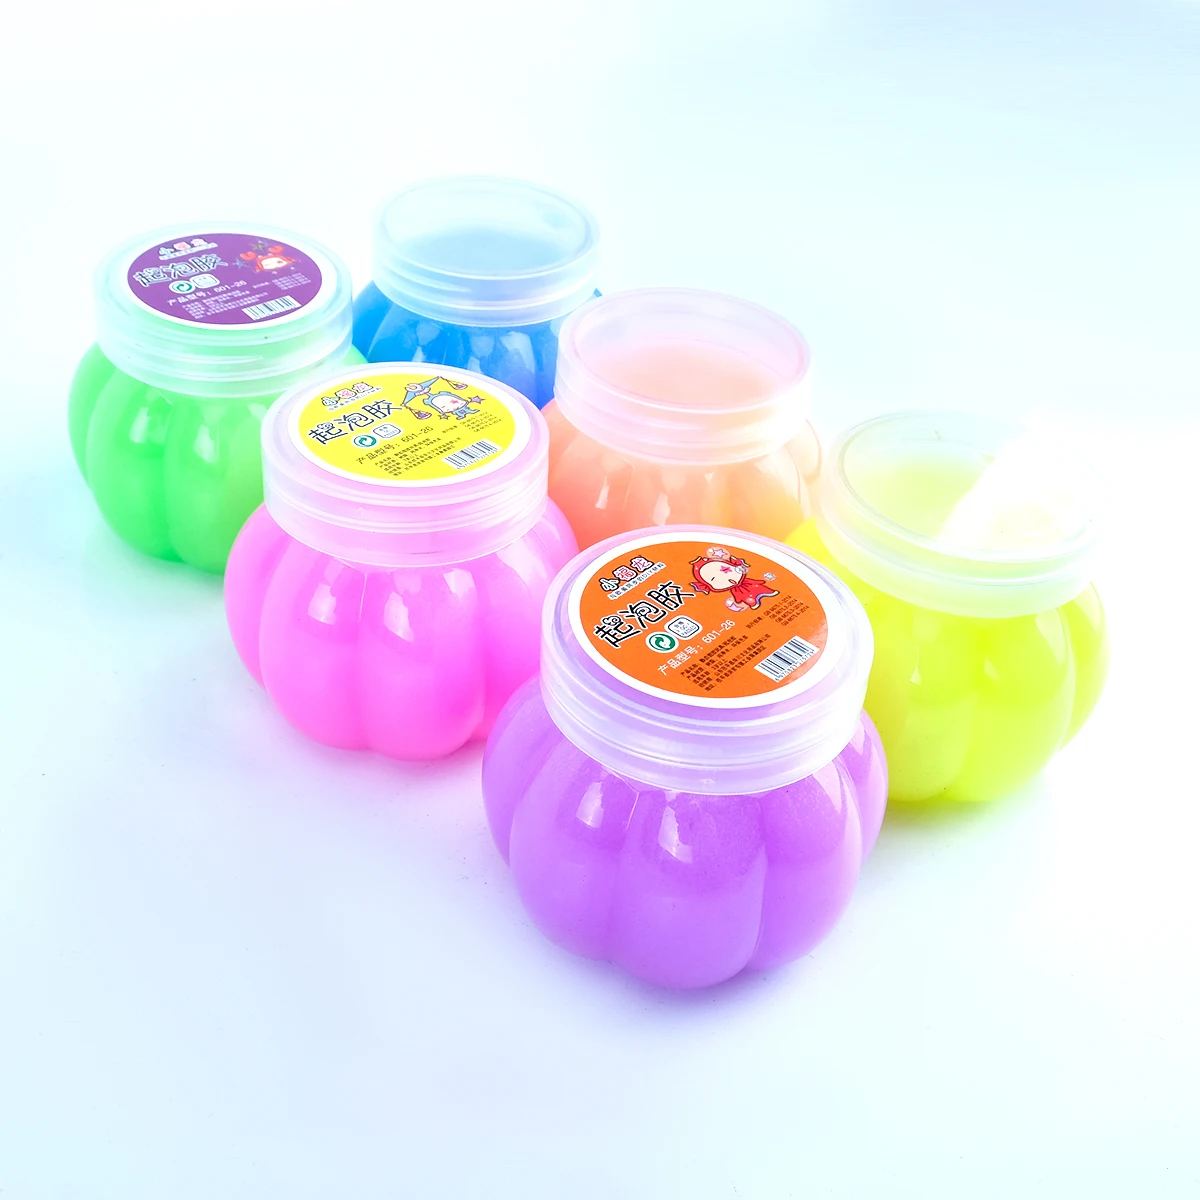 Wholesale juguetes al mayor thinking crazy unicorn crystal clear food colorful putty novelty slime From m.alibaba.com